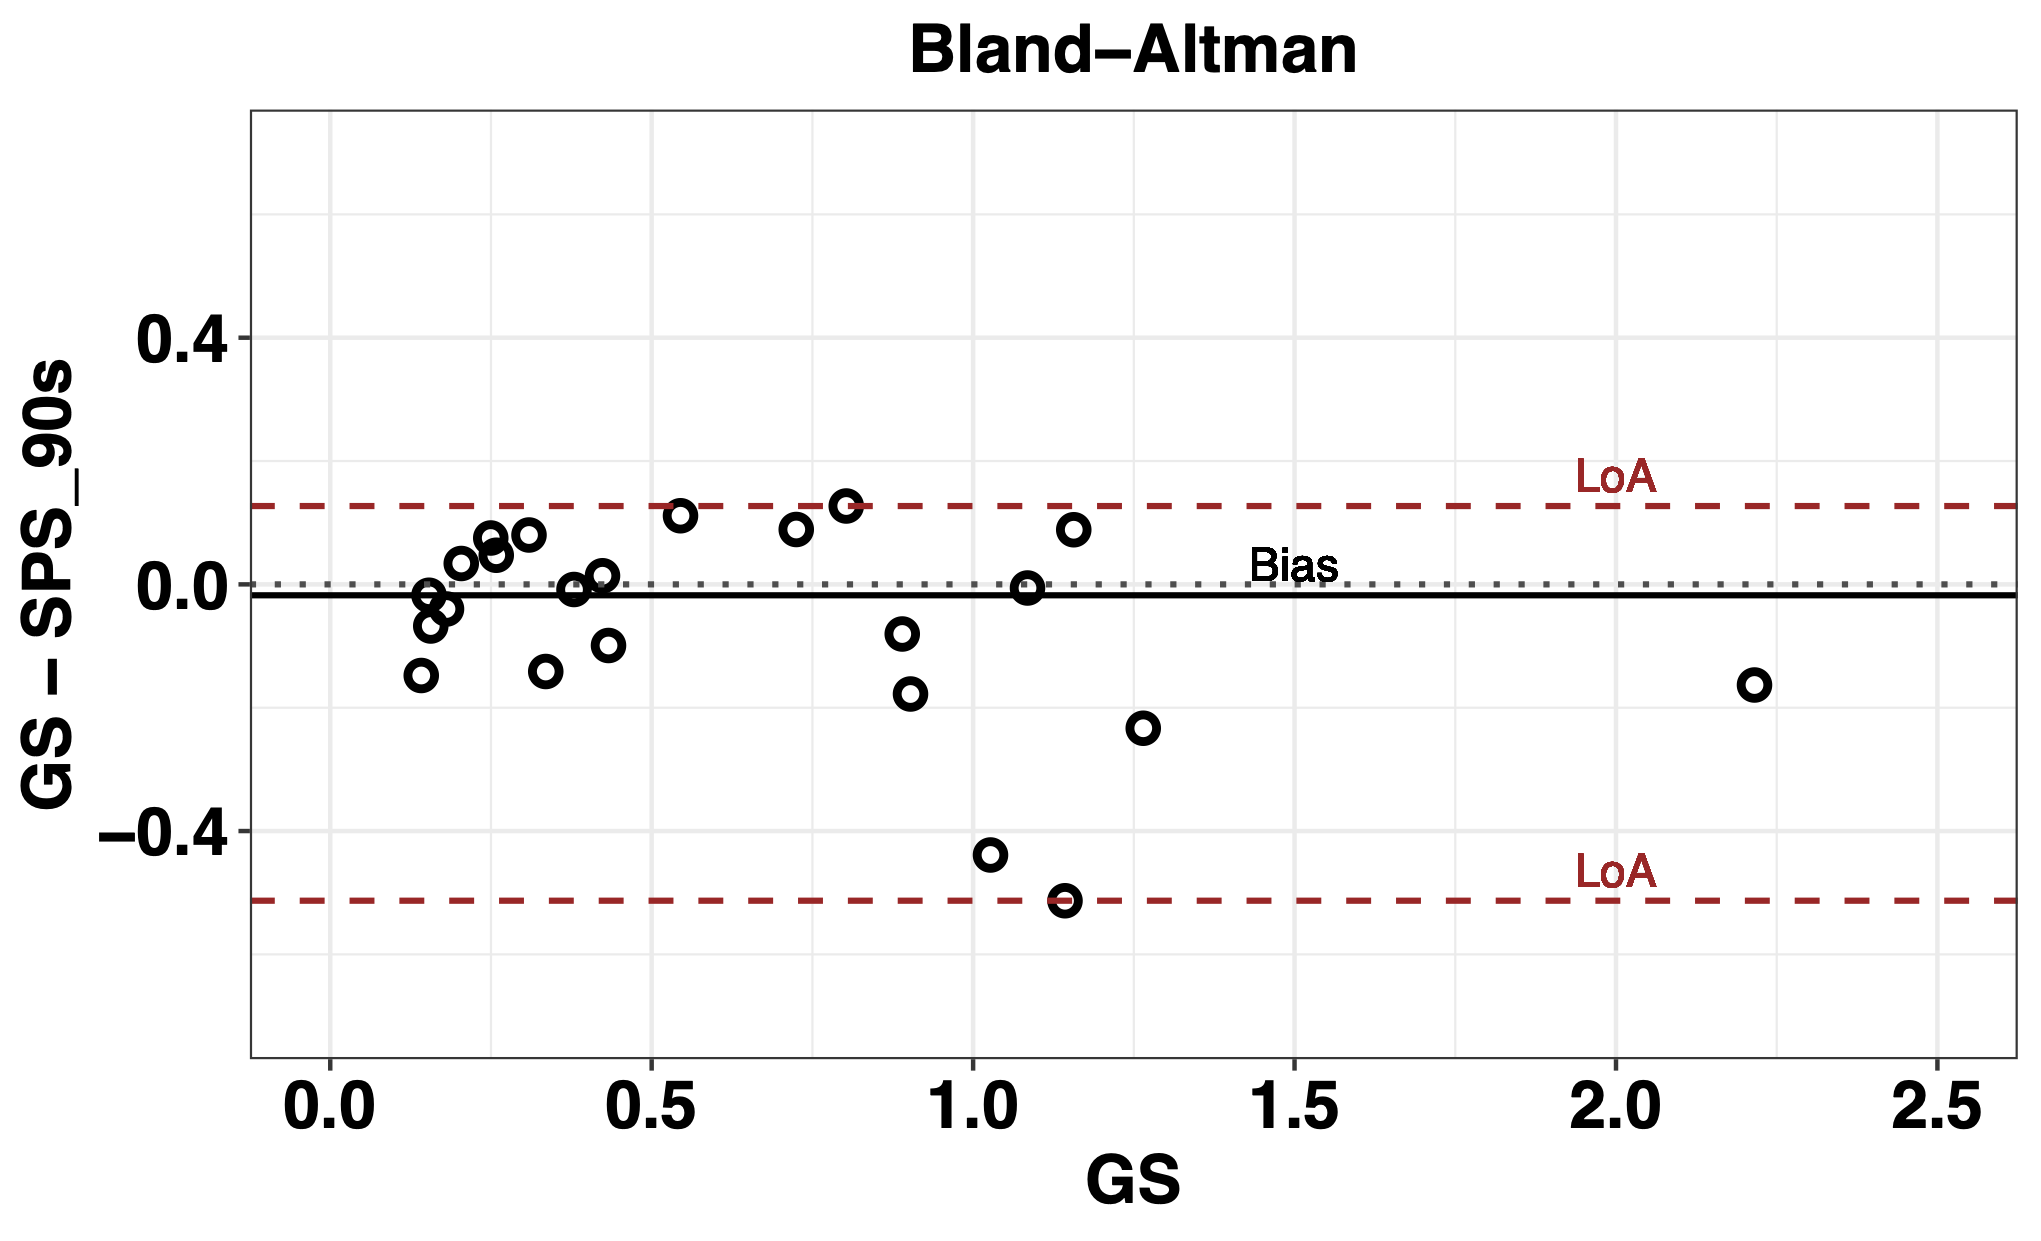 Analysis of the Bland-Altman plot to study the concordance between the GS and the 90 sseries of the SPS index.